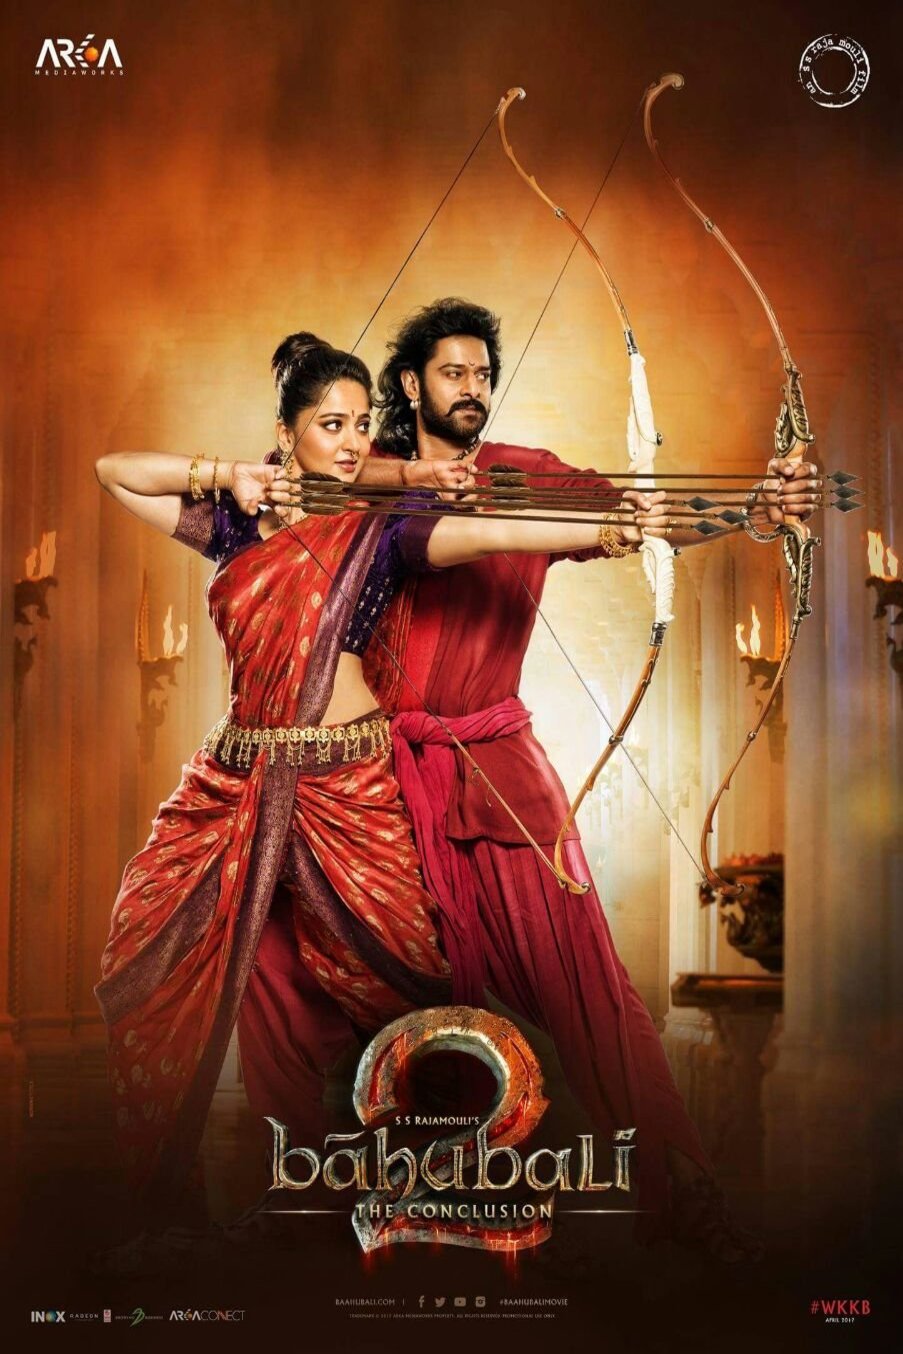 Hindi poster of the movie Baahubali 2: The Conclusion